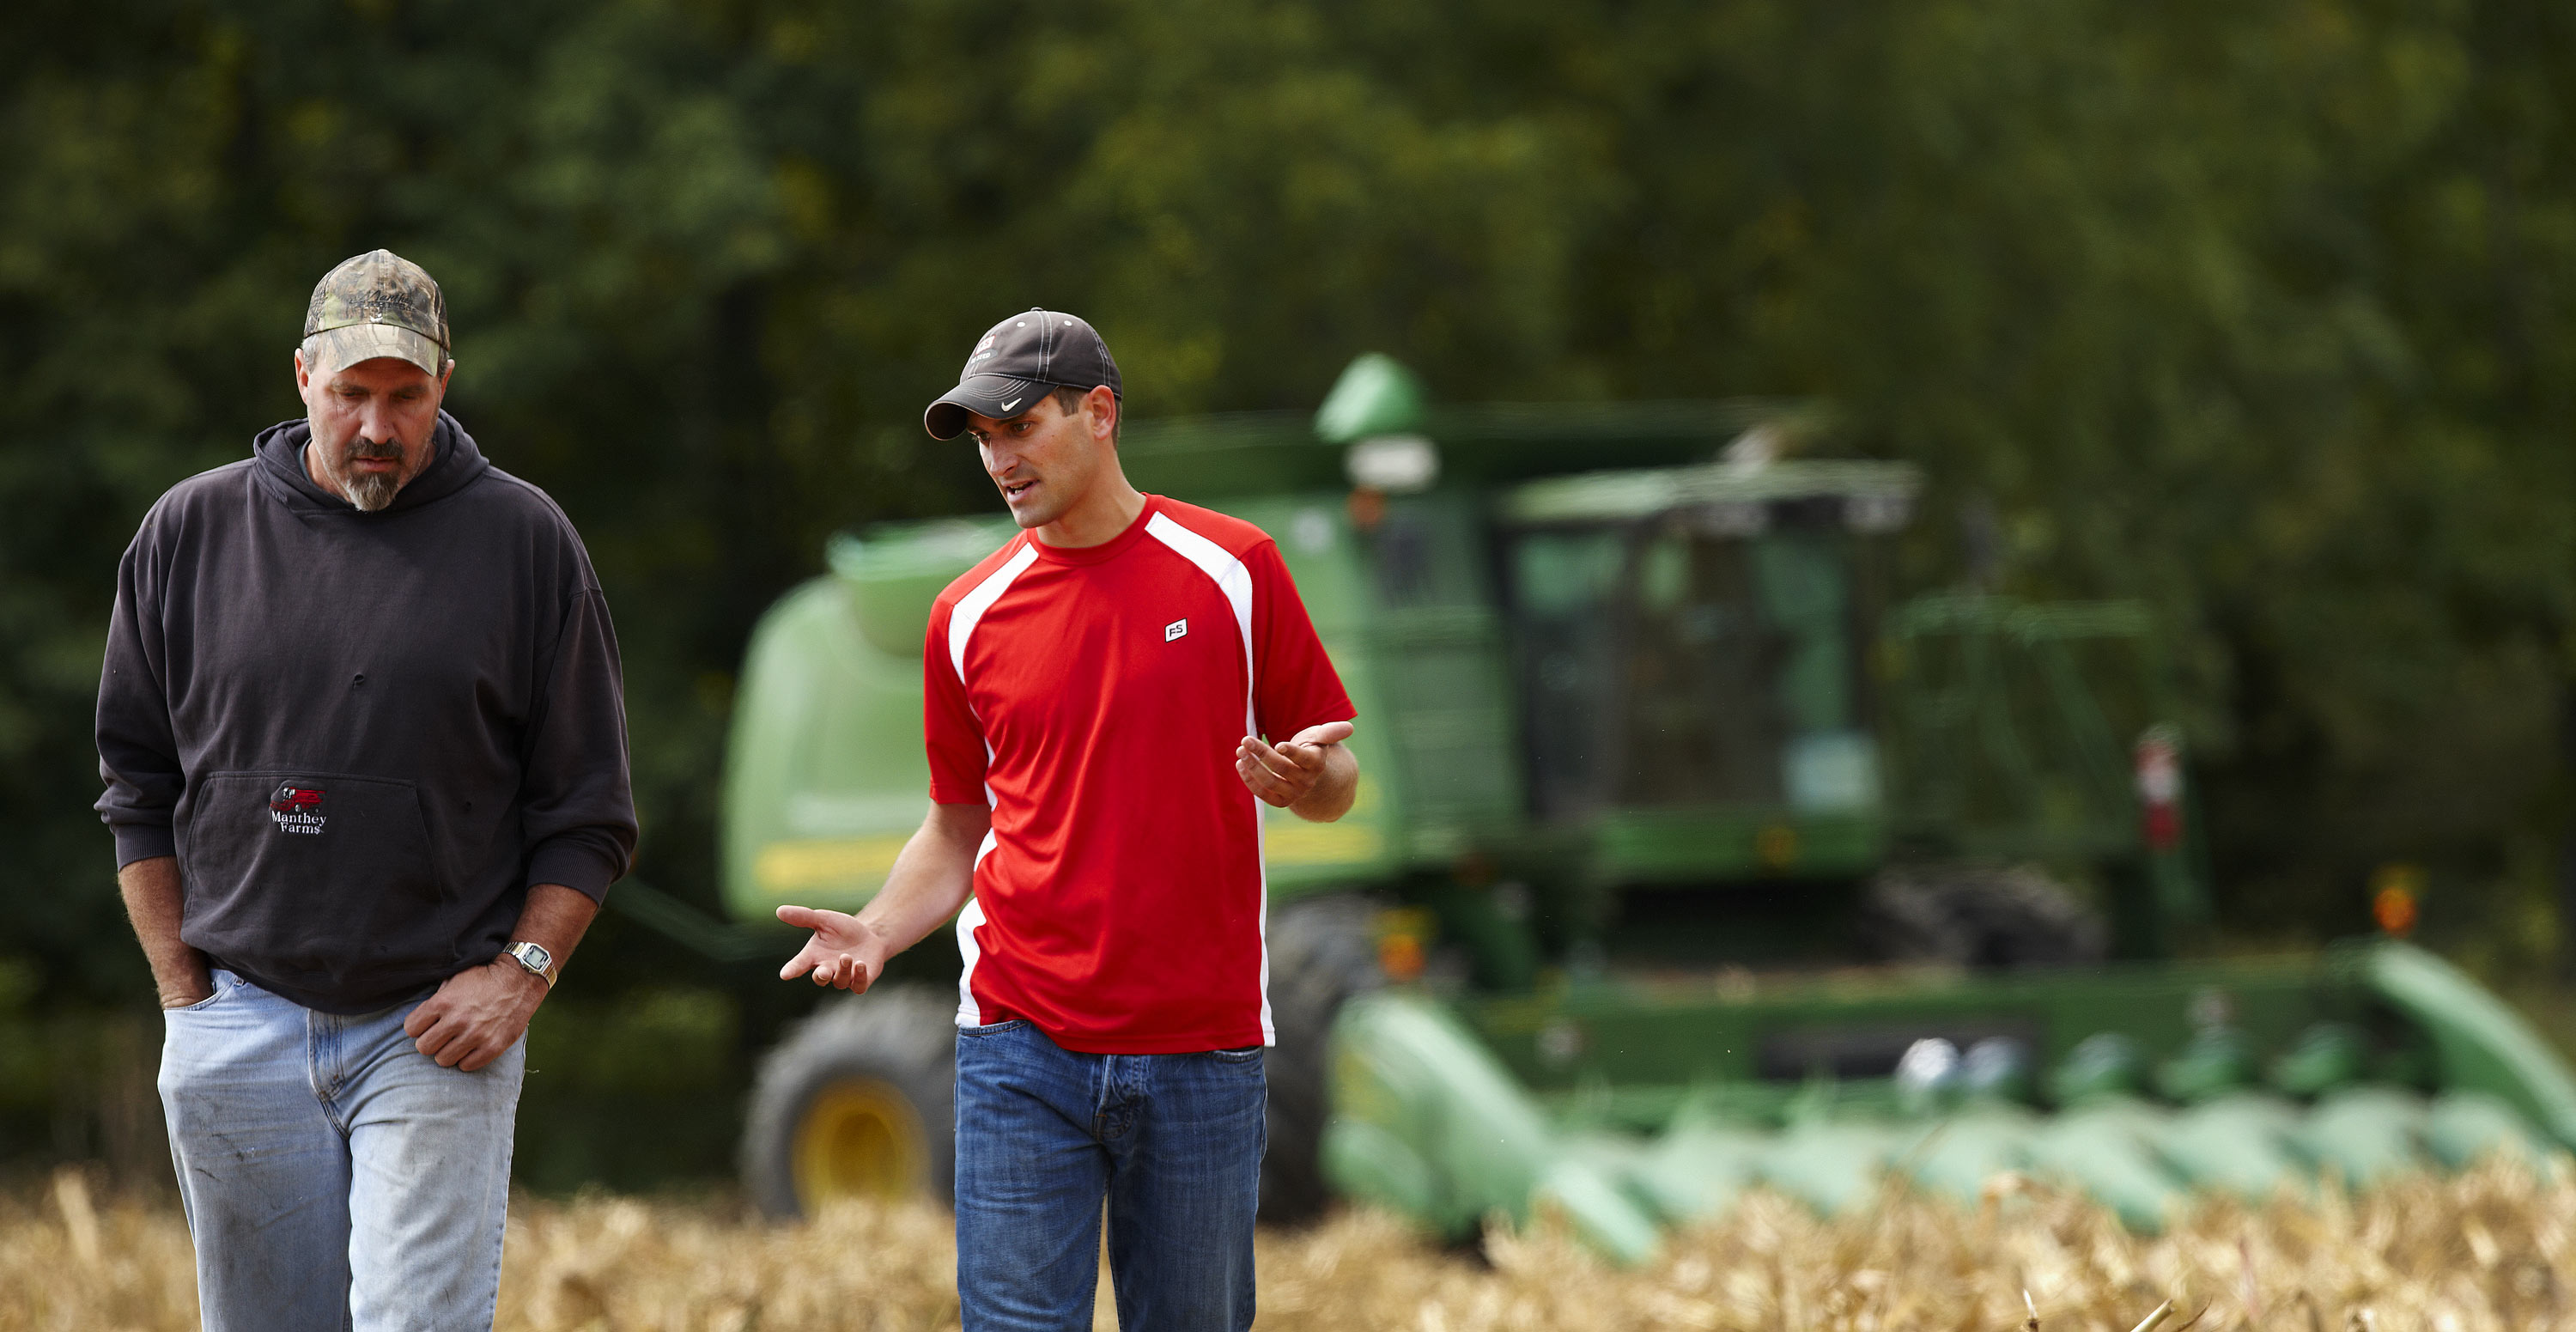 John Nienhuis | Midwest Agriculture Photographer |  Advertising Photography